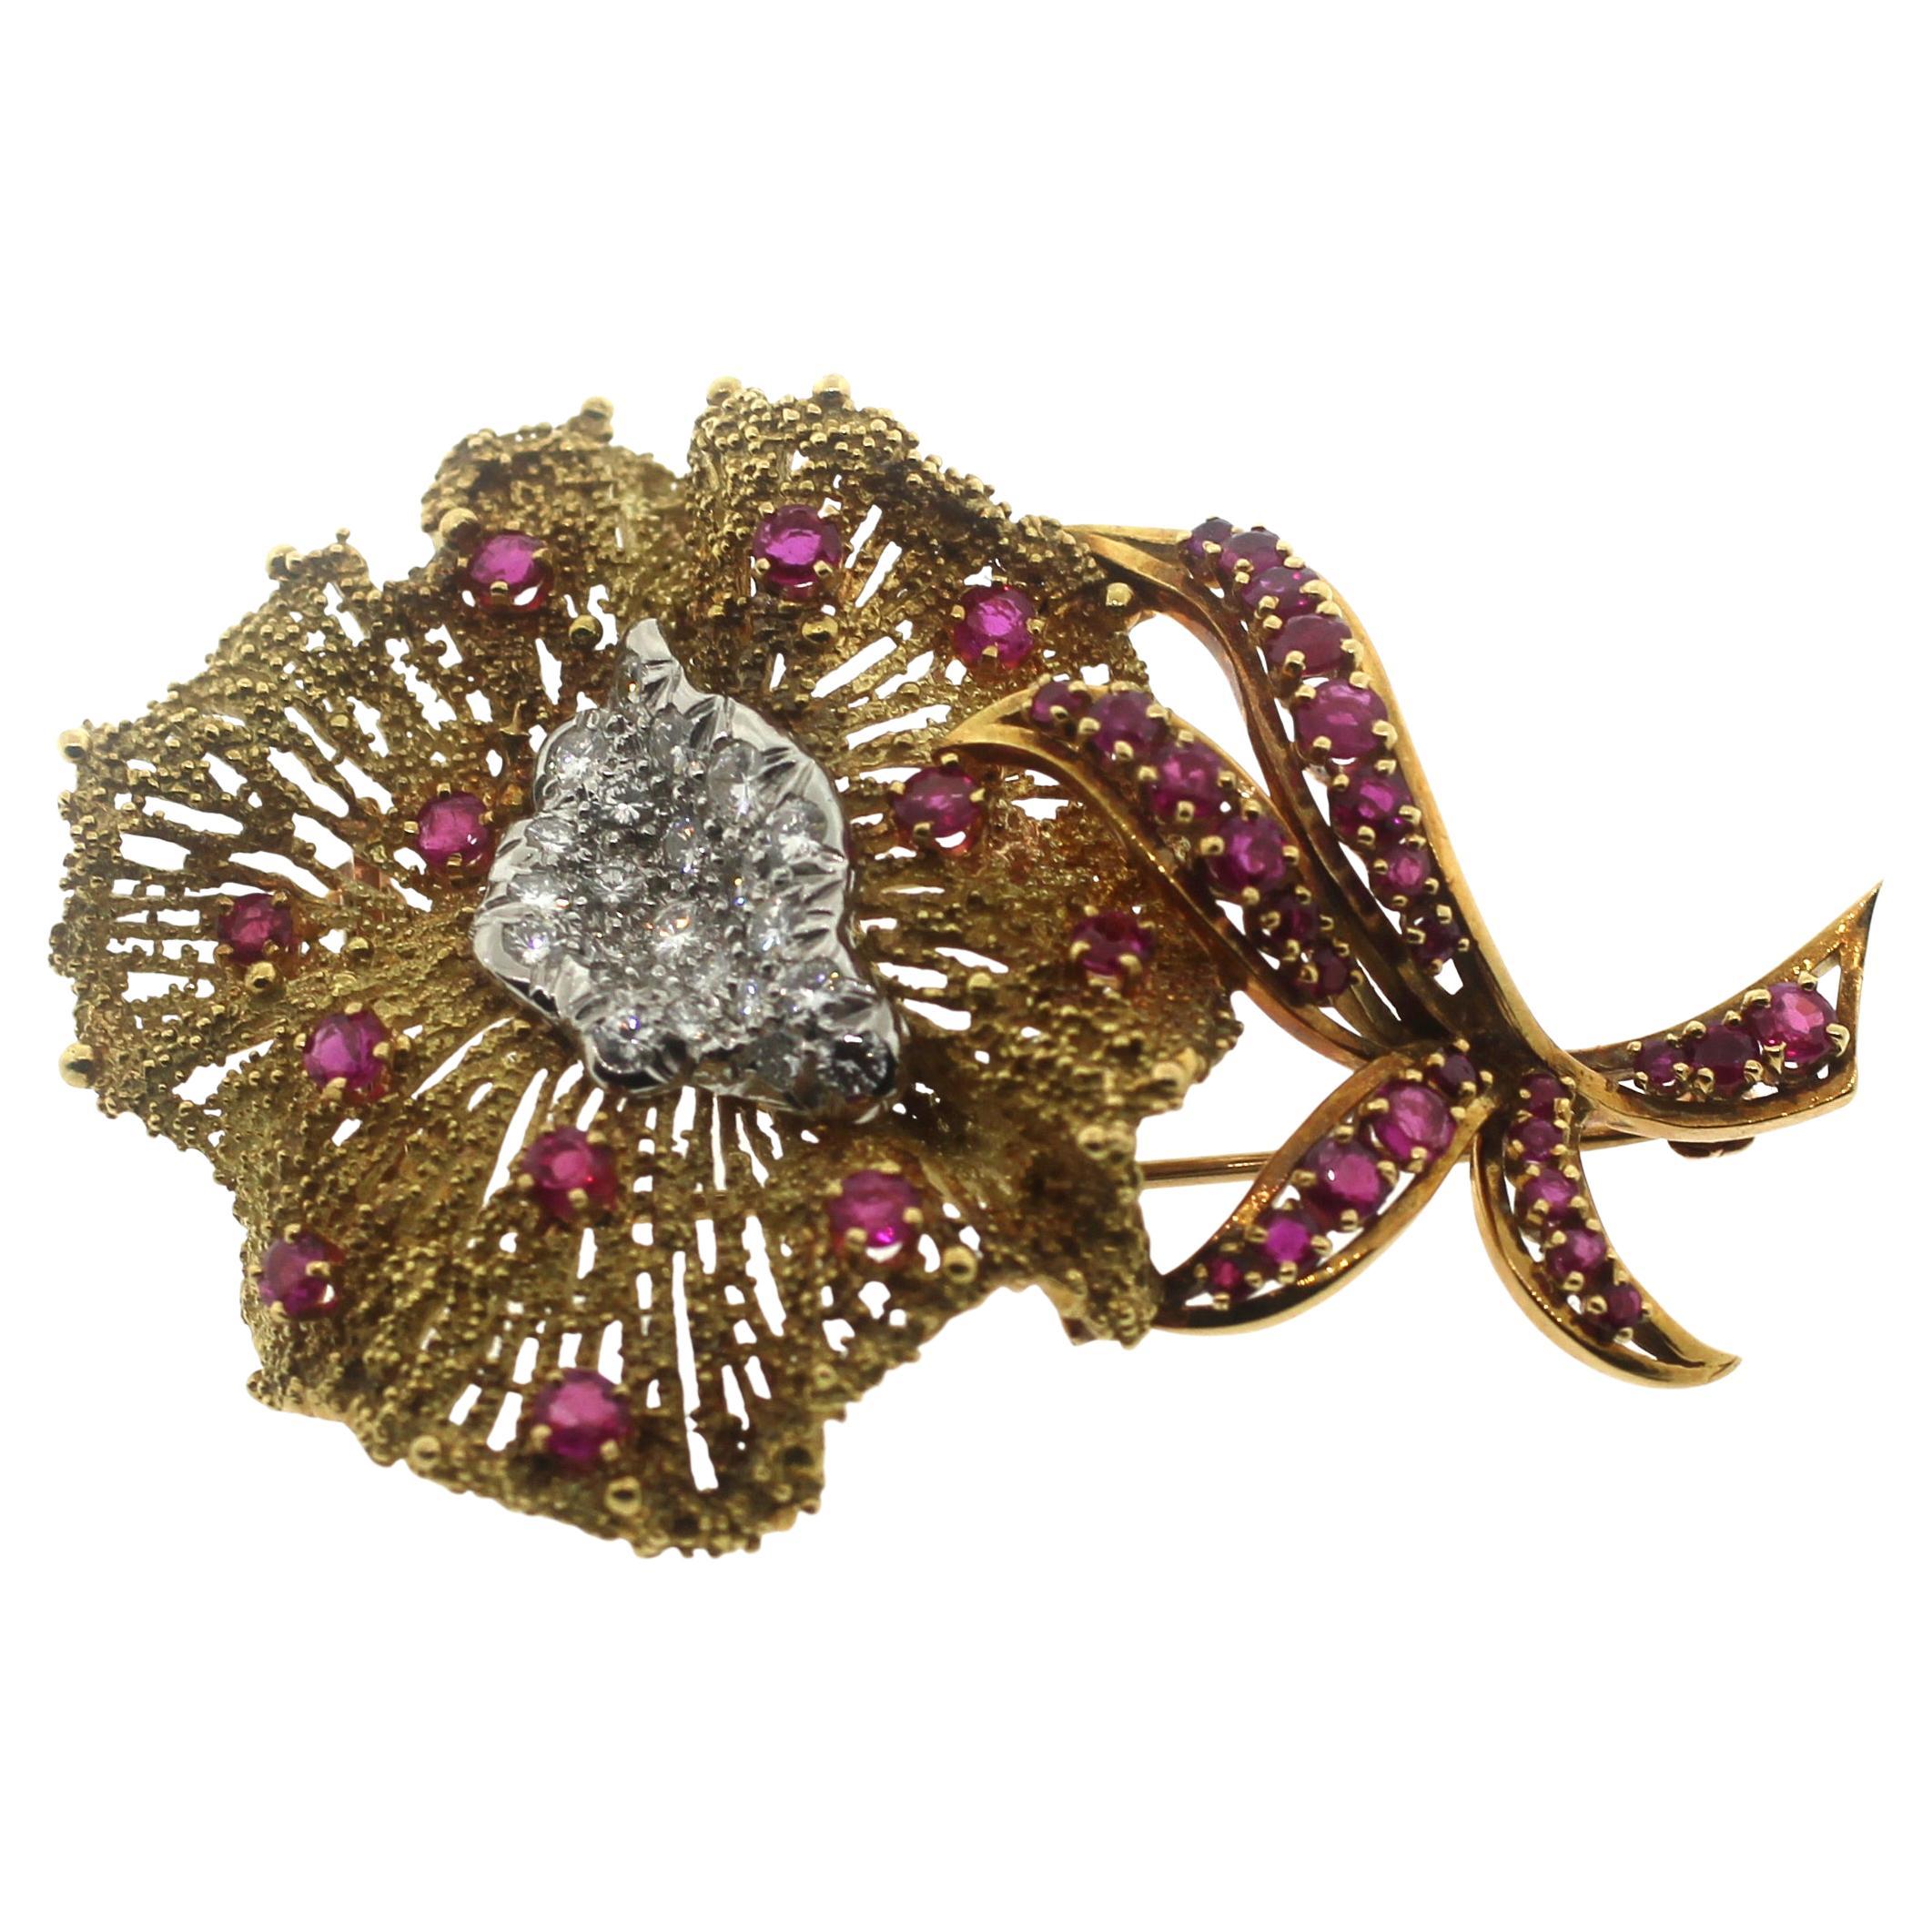 18K Yellow Gold and Diamond, Ruby Estate Flower Brooch
convertible to Pendent
1.5 Carts Diamonds
3 Carats Robby
31.4 Grams
2.2